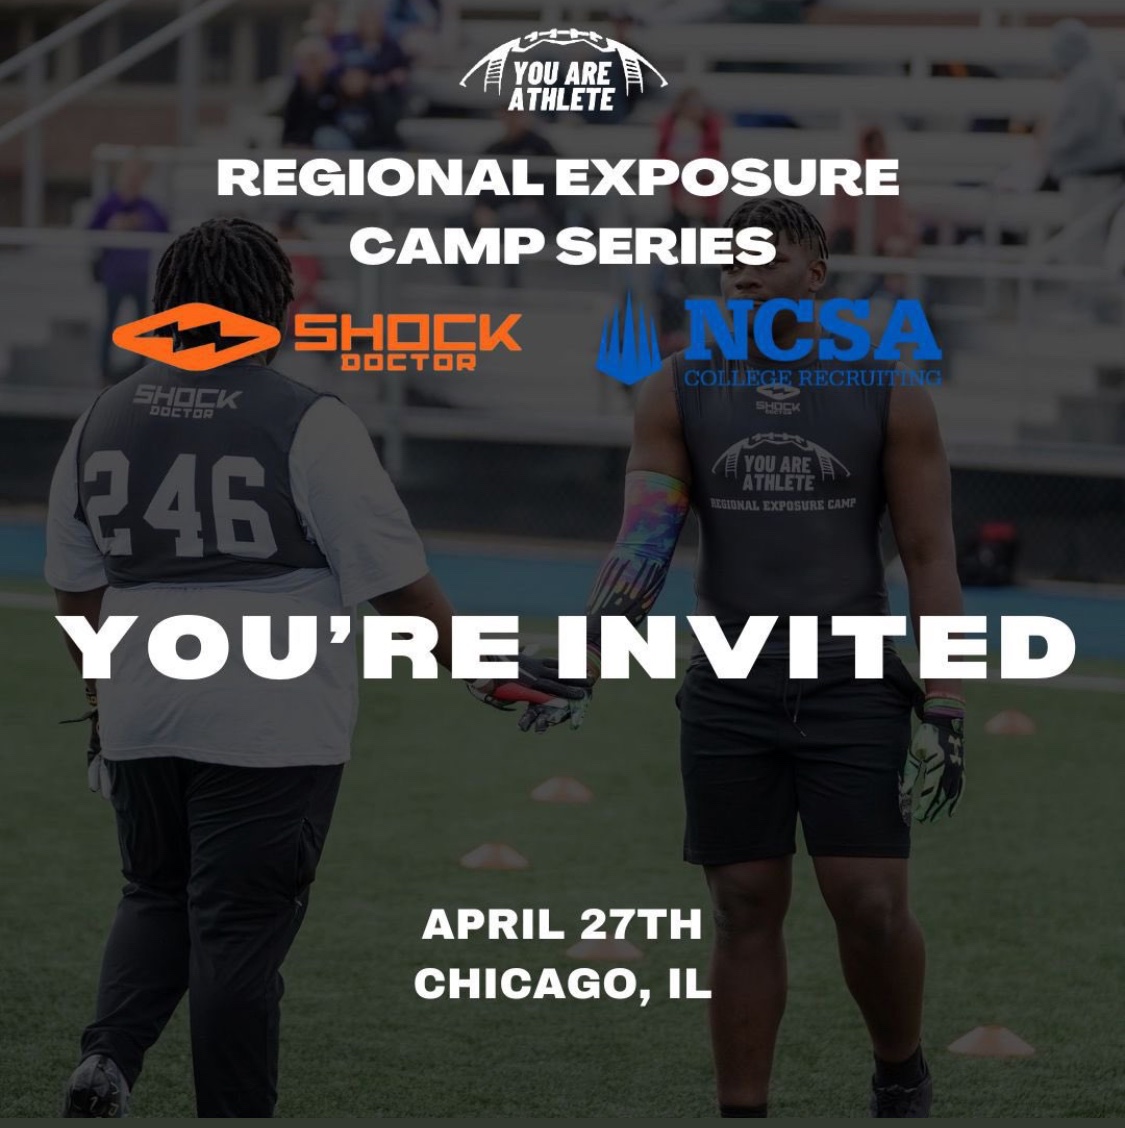 Blessed for the invite ‼️@youareathlete @FCProspects_ @mbates_7 @EDGYTIM @Channel1450com @coach_andrews07 @CoachFreitag @CoachTS11